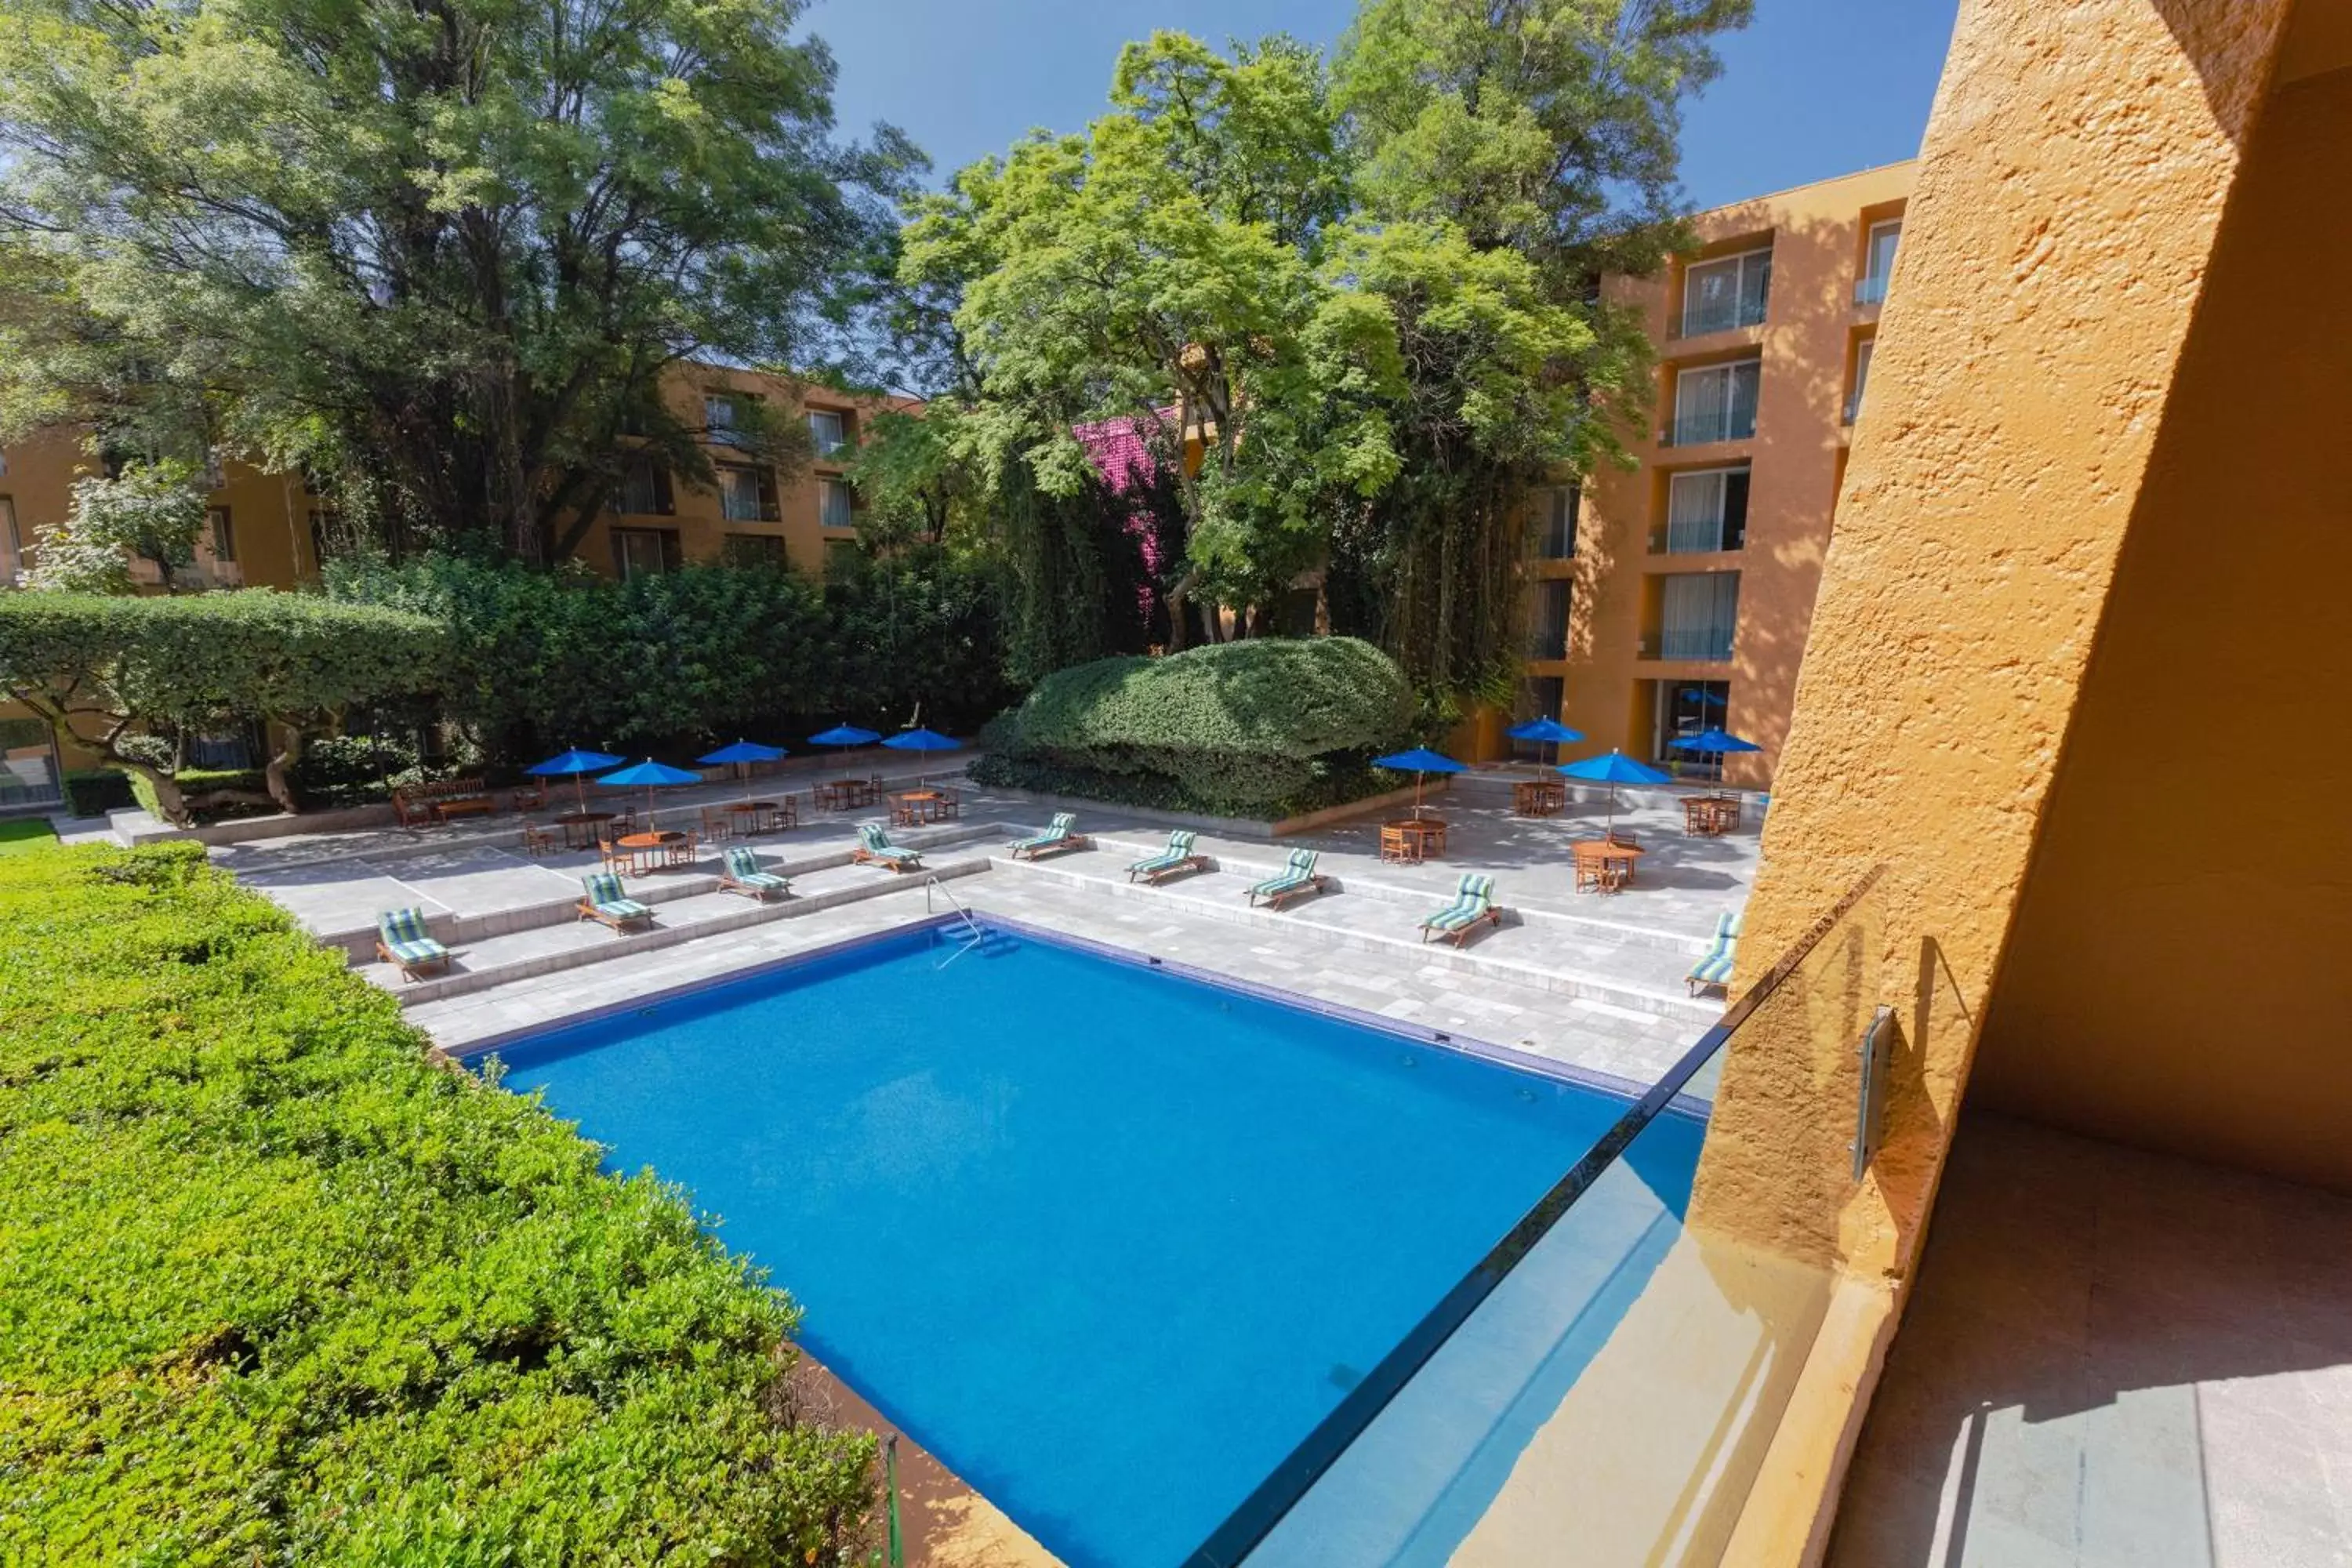 Property building, Pool View in Camino Real Polanco Mexico